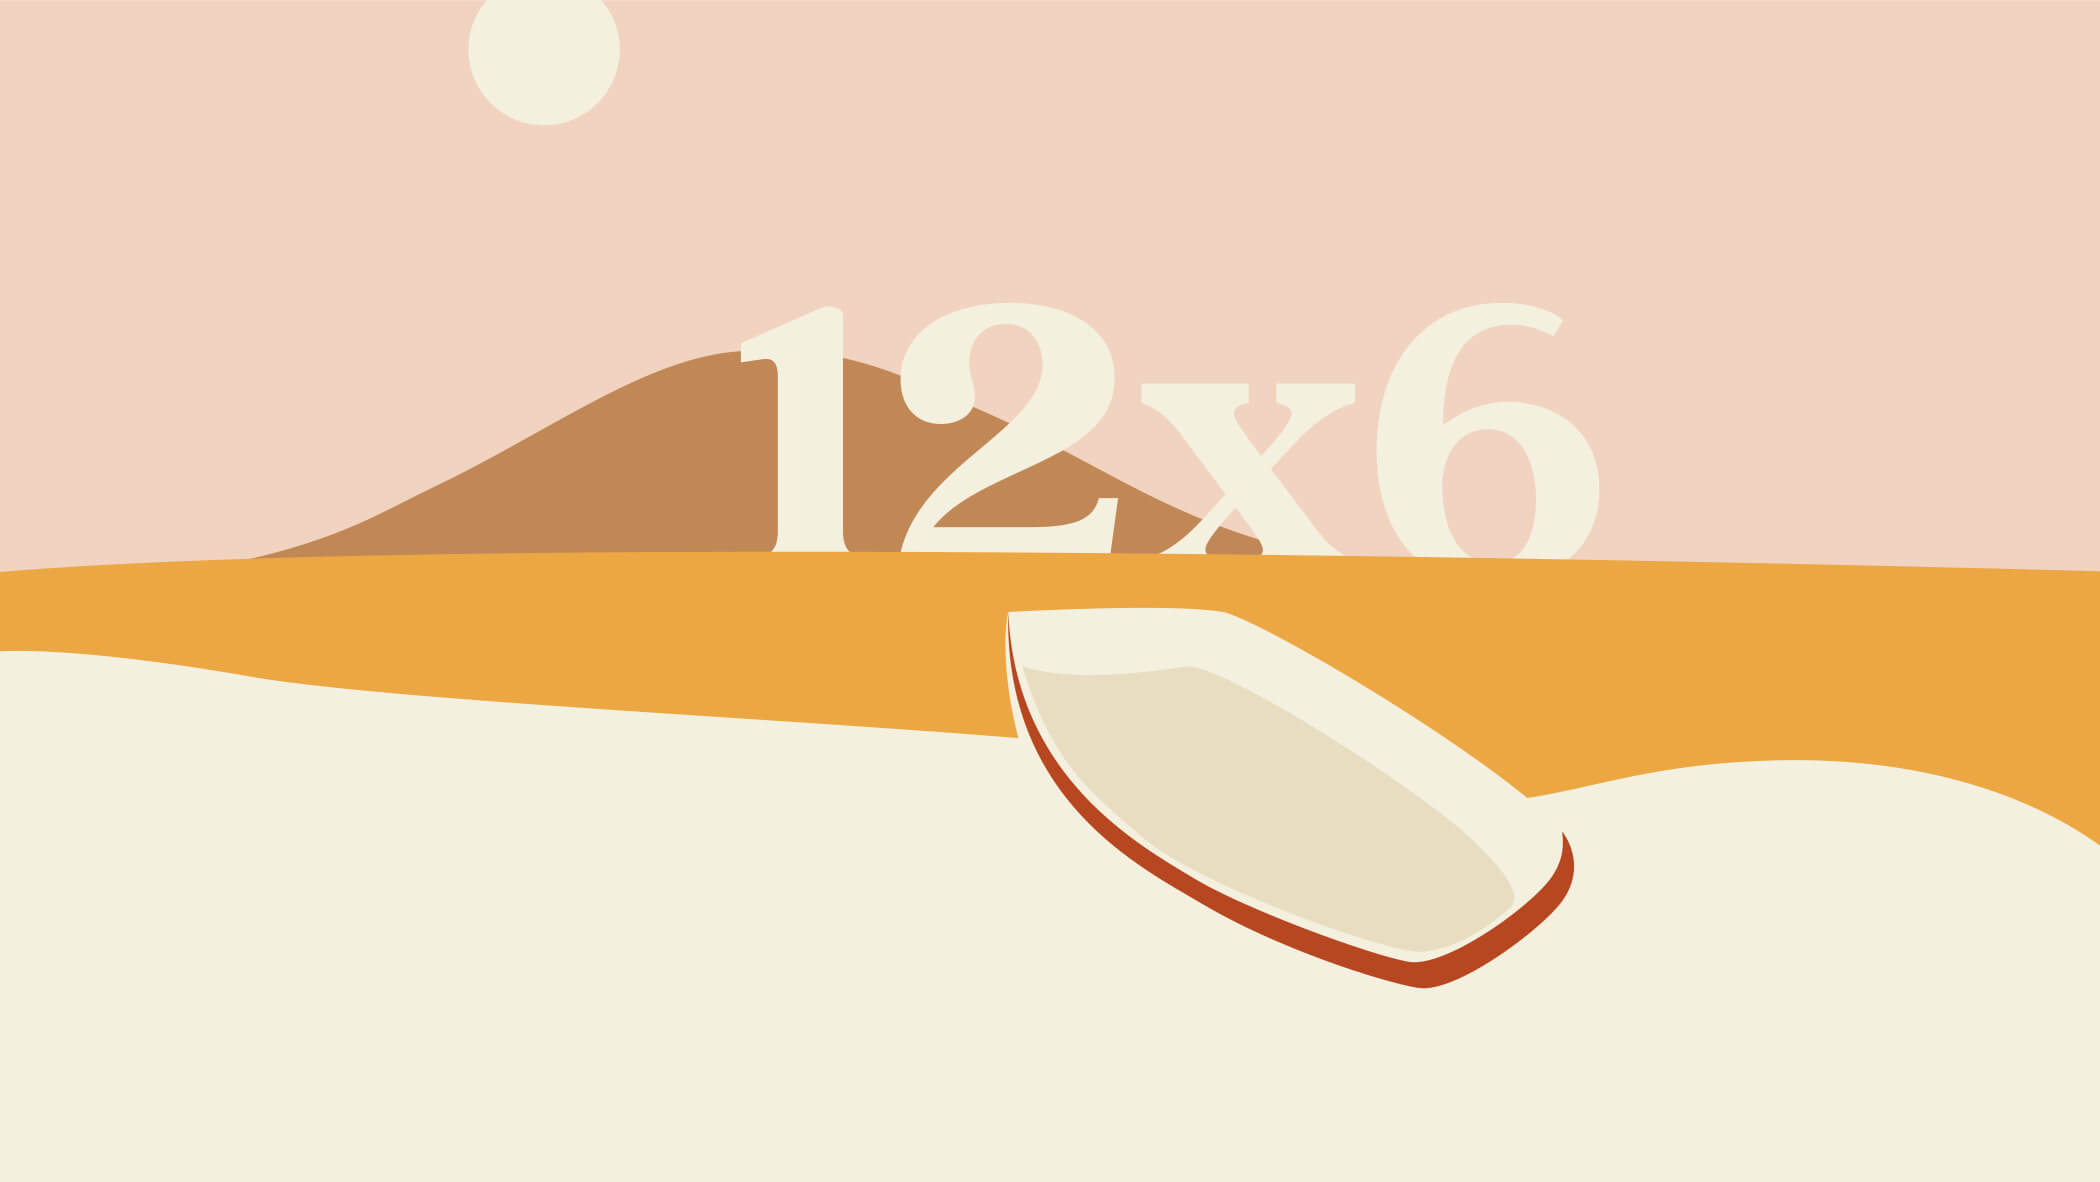 12x6 illustration of a beach, boat, and sun